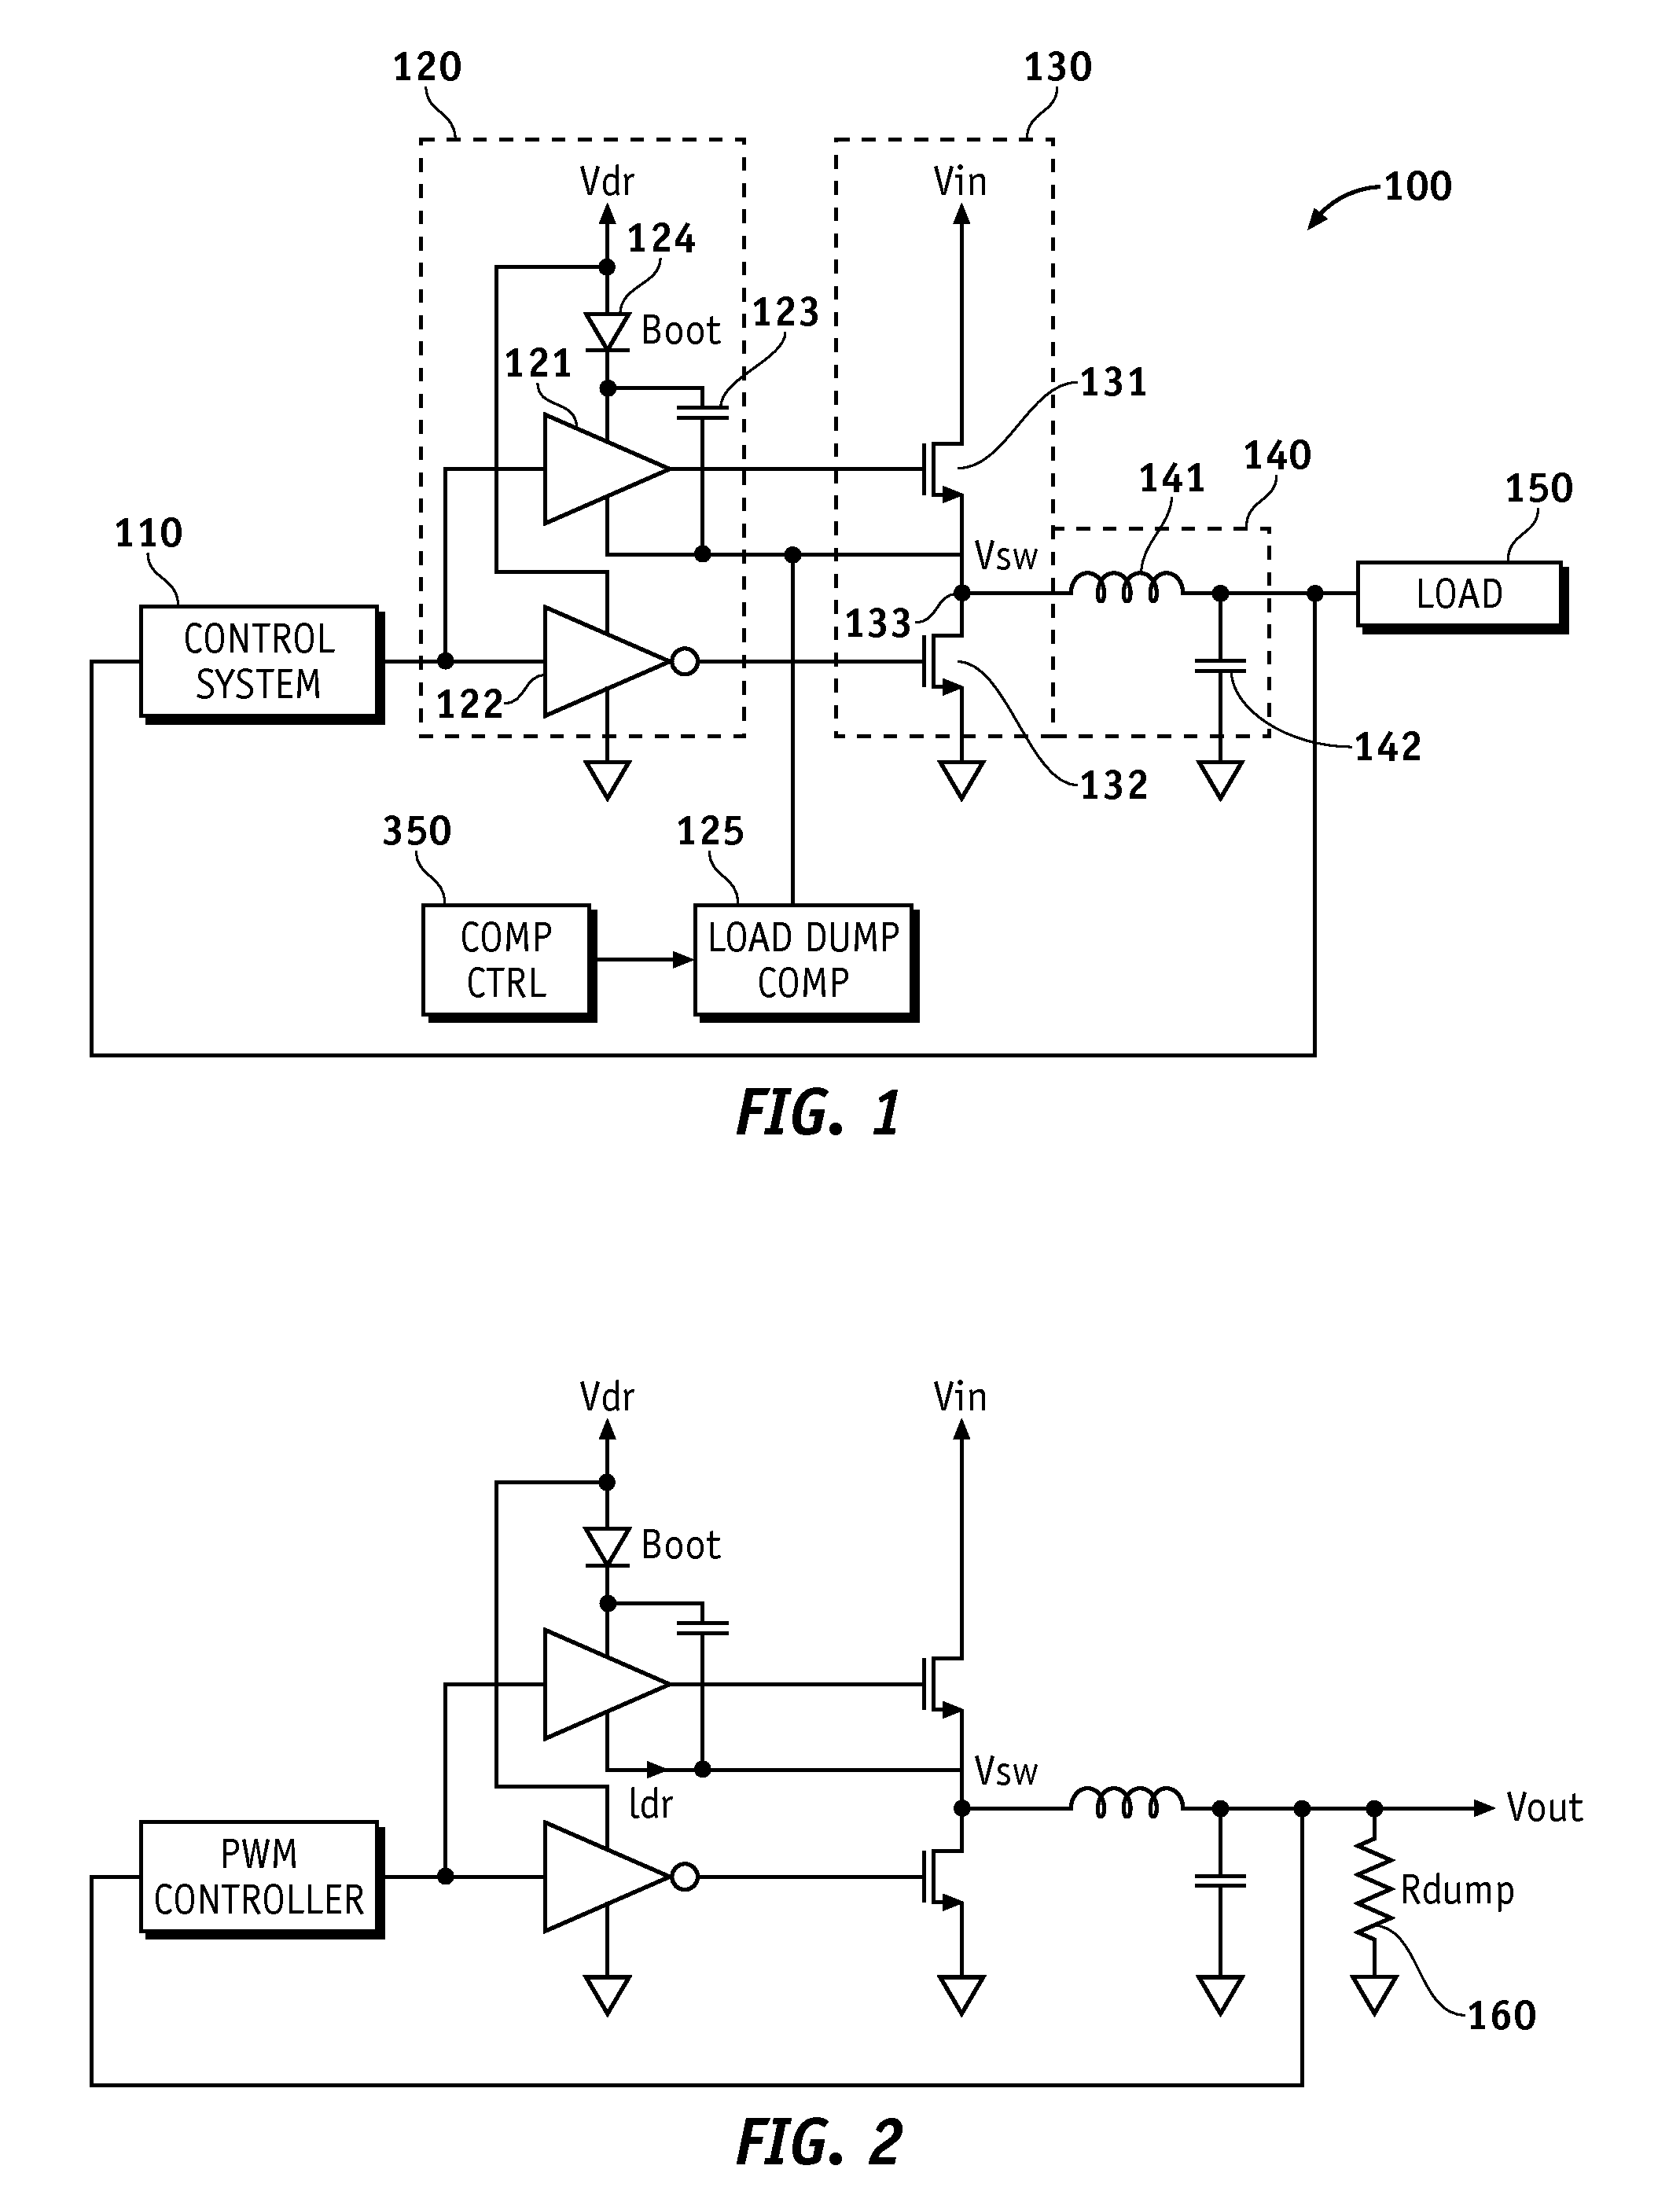 Methods and apparatus for power supply load dump compensation